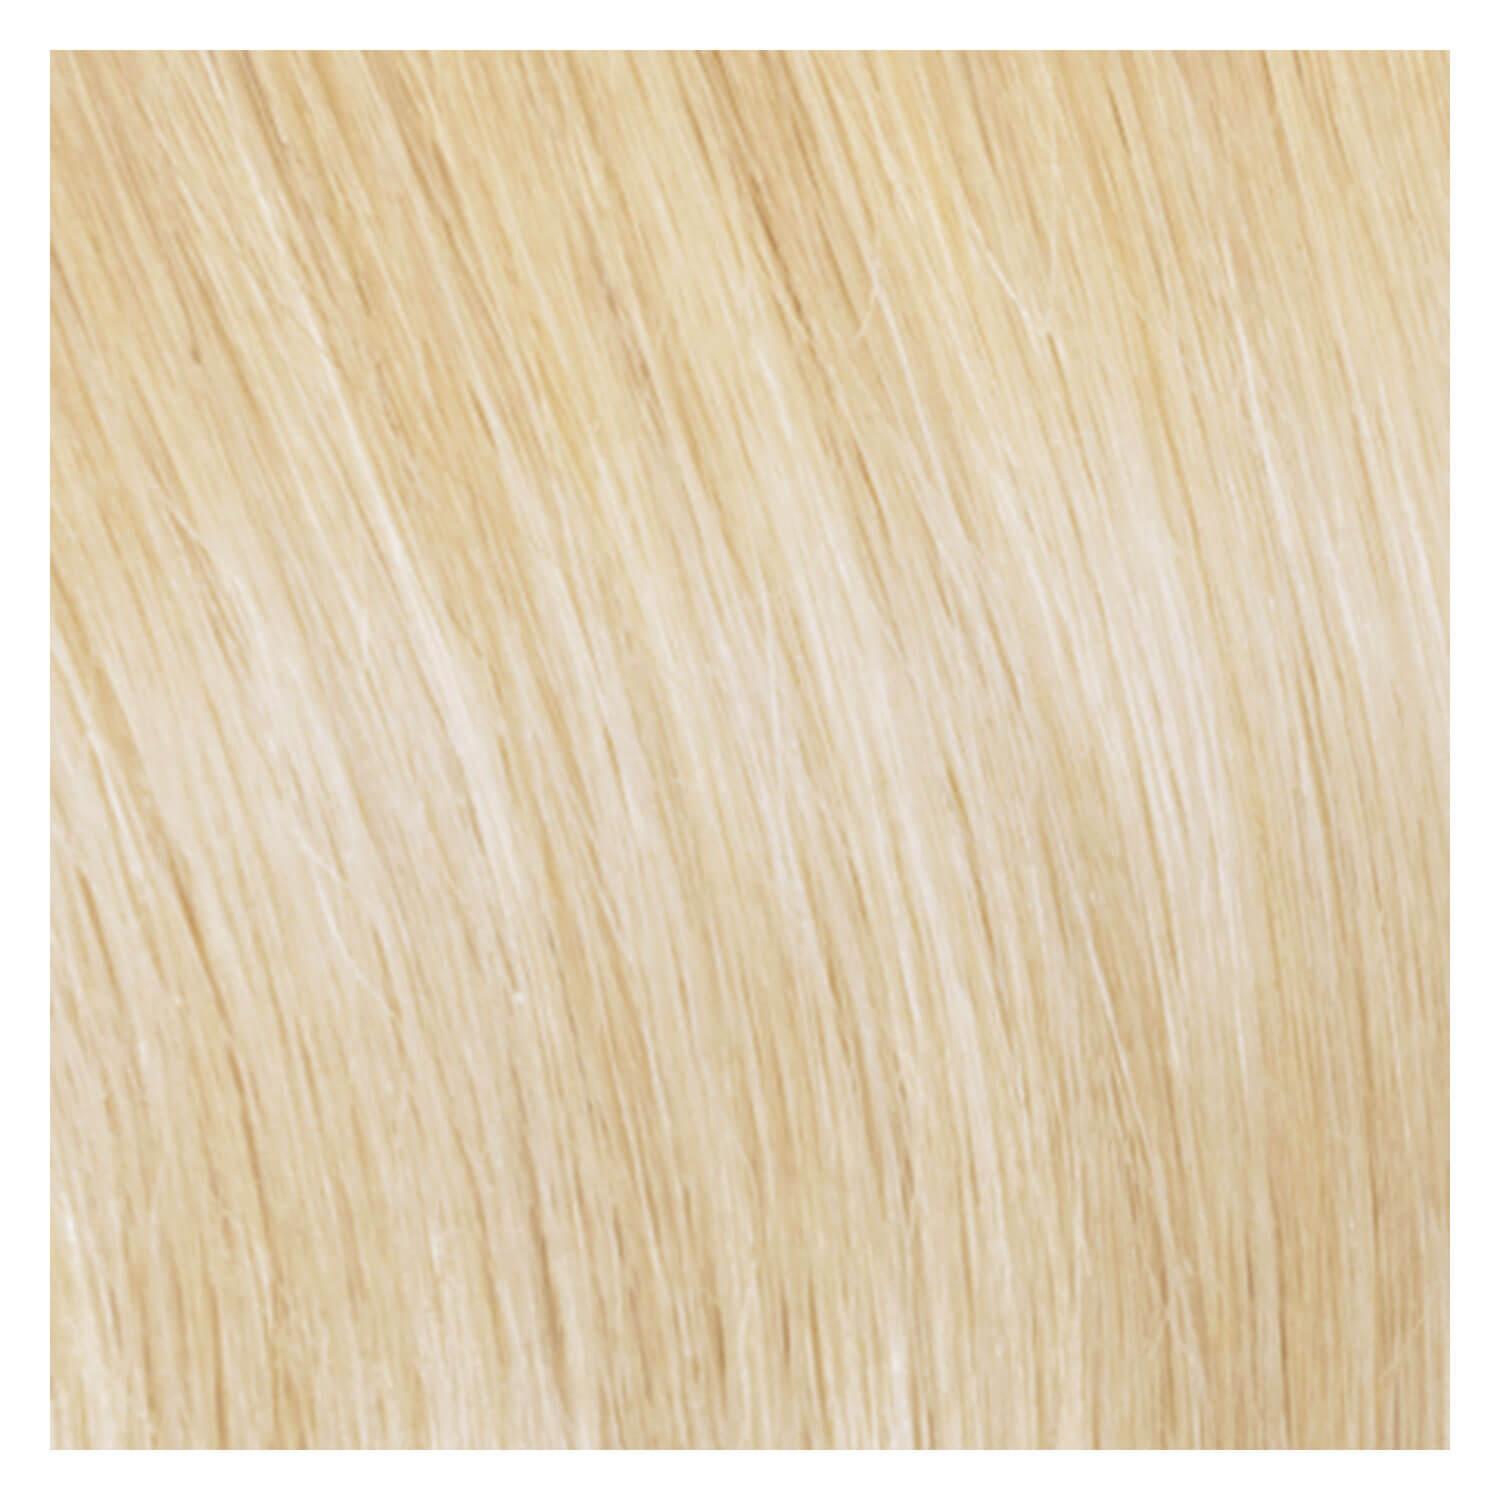 SHE Flip In-System Hair Extensions - 1001 Sehr helles Platinblond 50/55cm